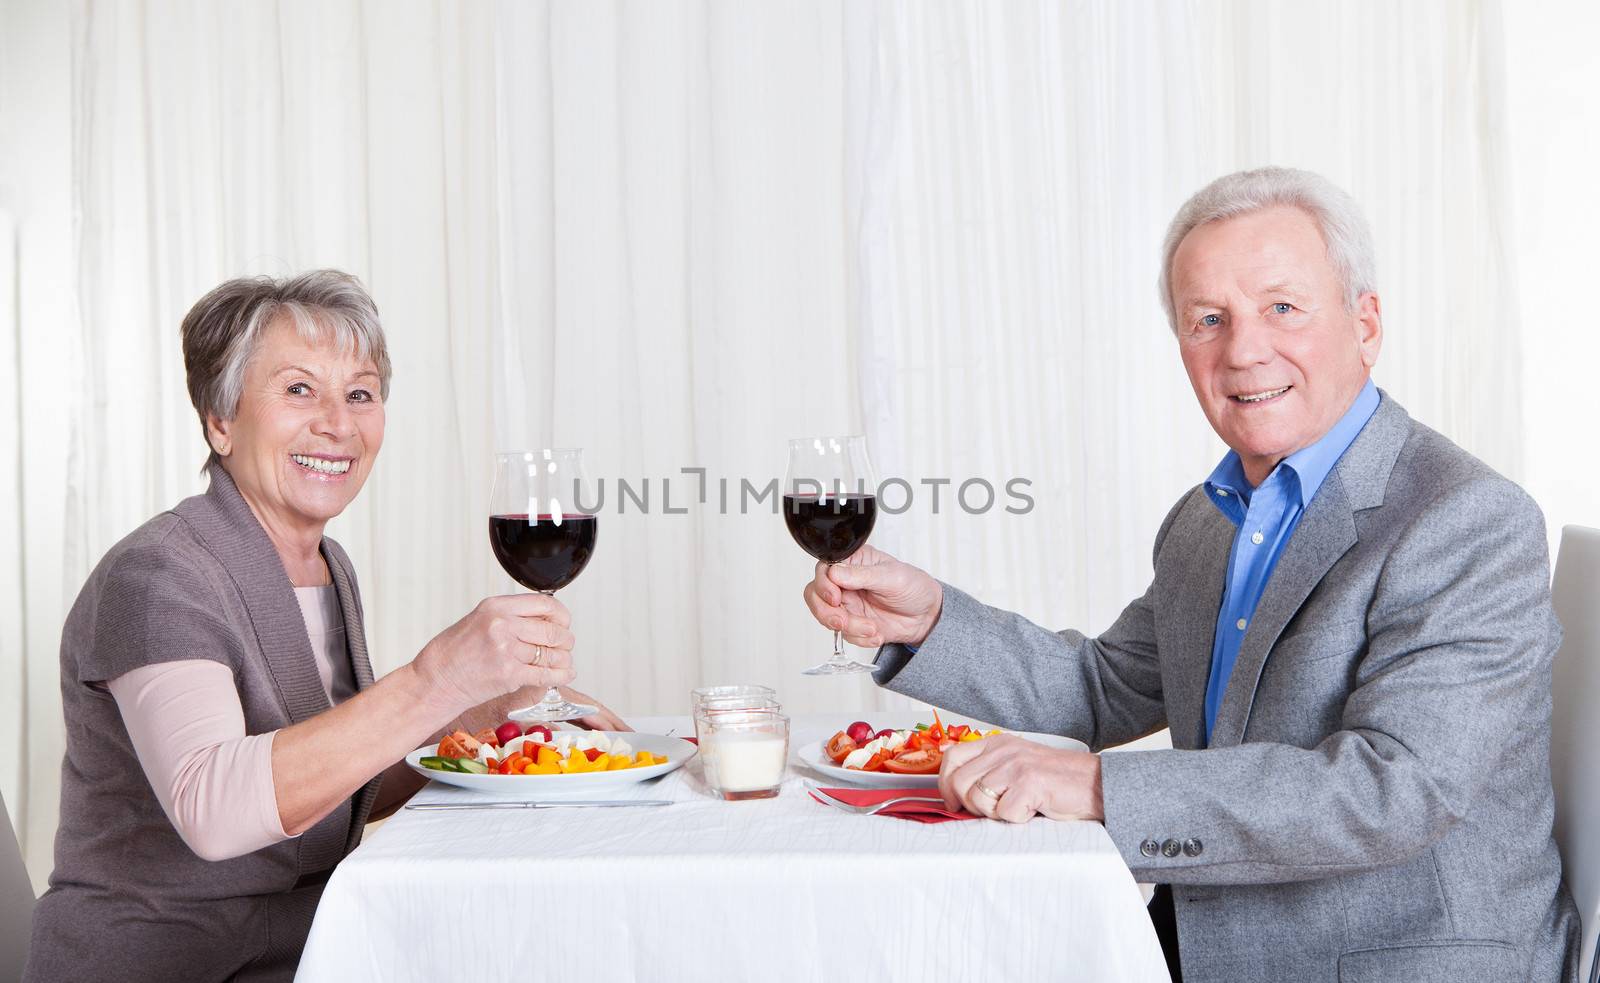 Portrait Of Senior Couple With Wine Glasses Sitting At A Restaurant